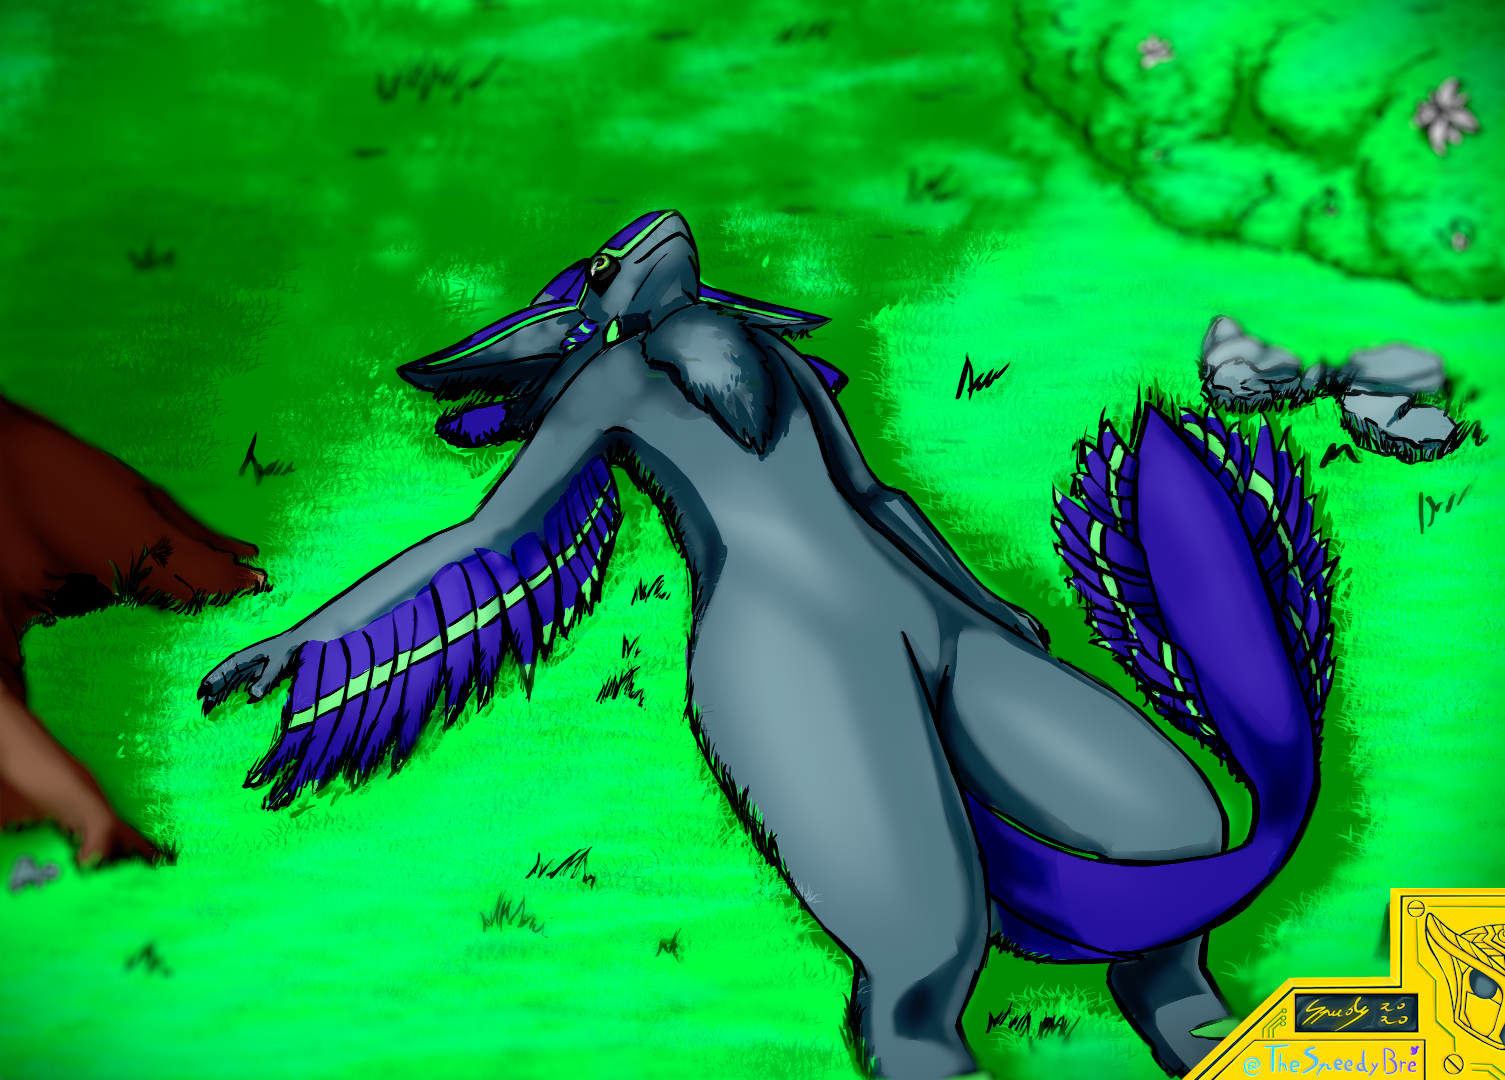 Artwork of Eija lying under a tree, done by TheSpeedyBre at twitter.com